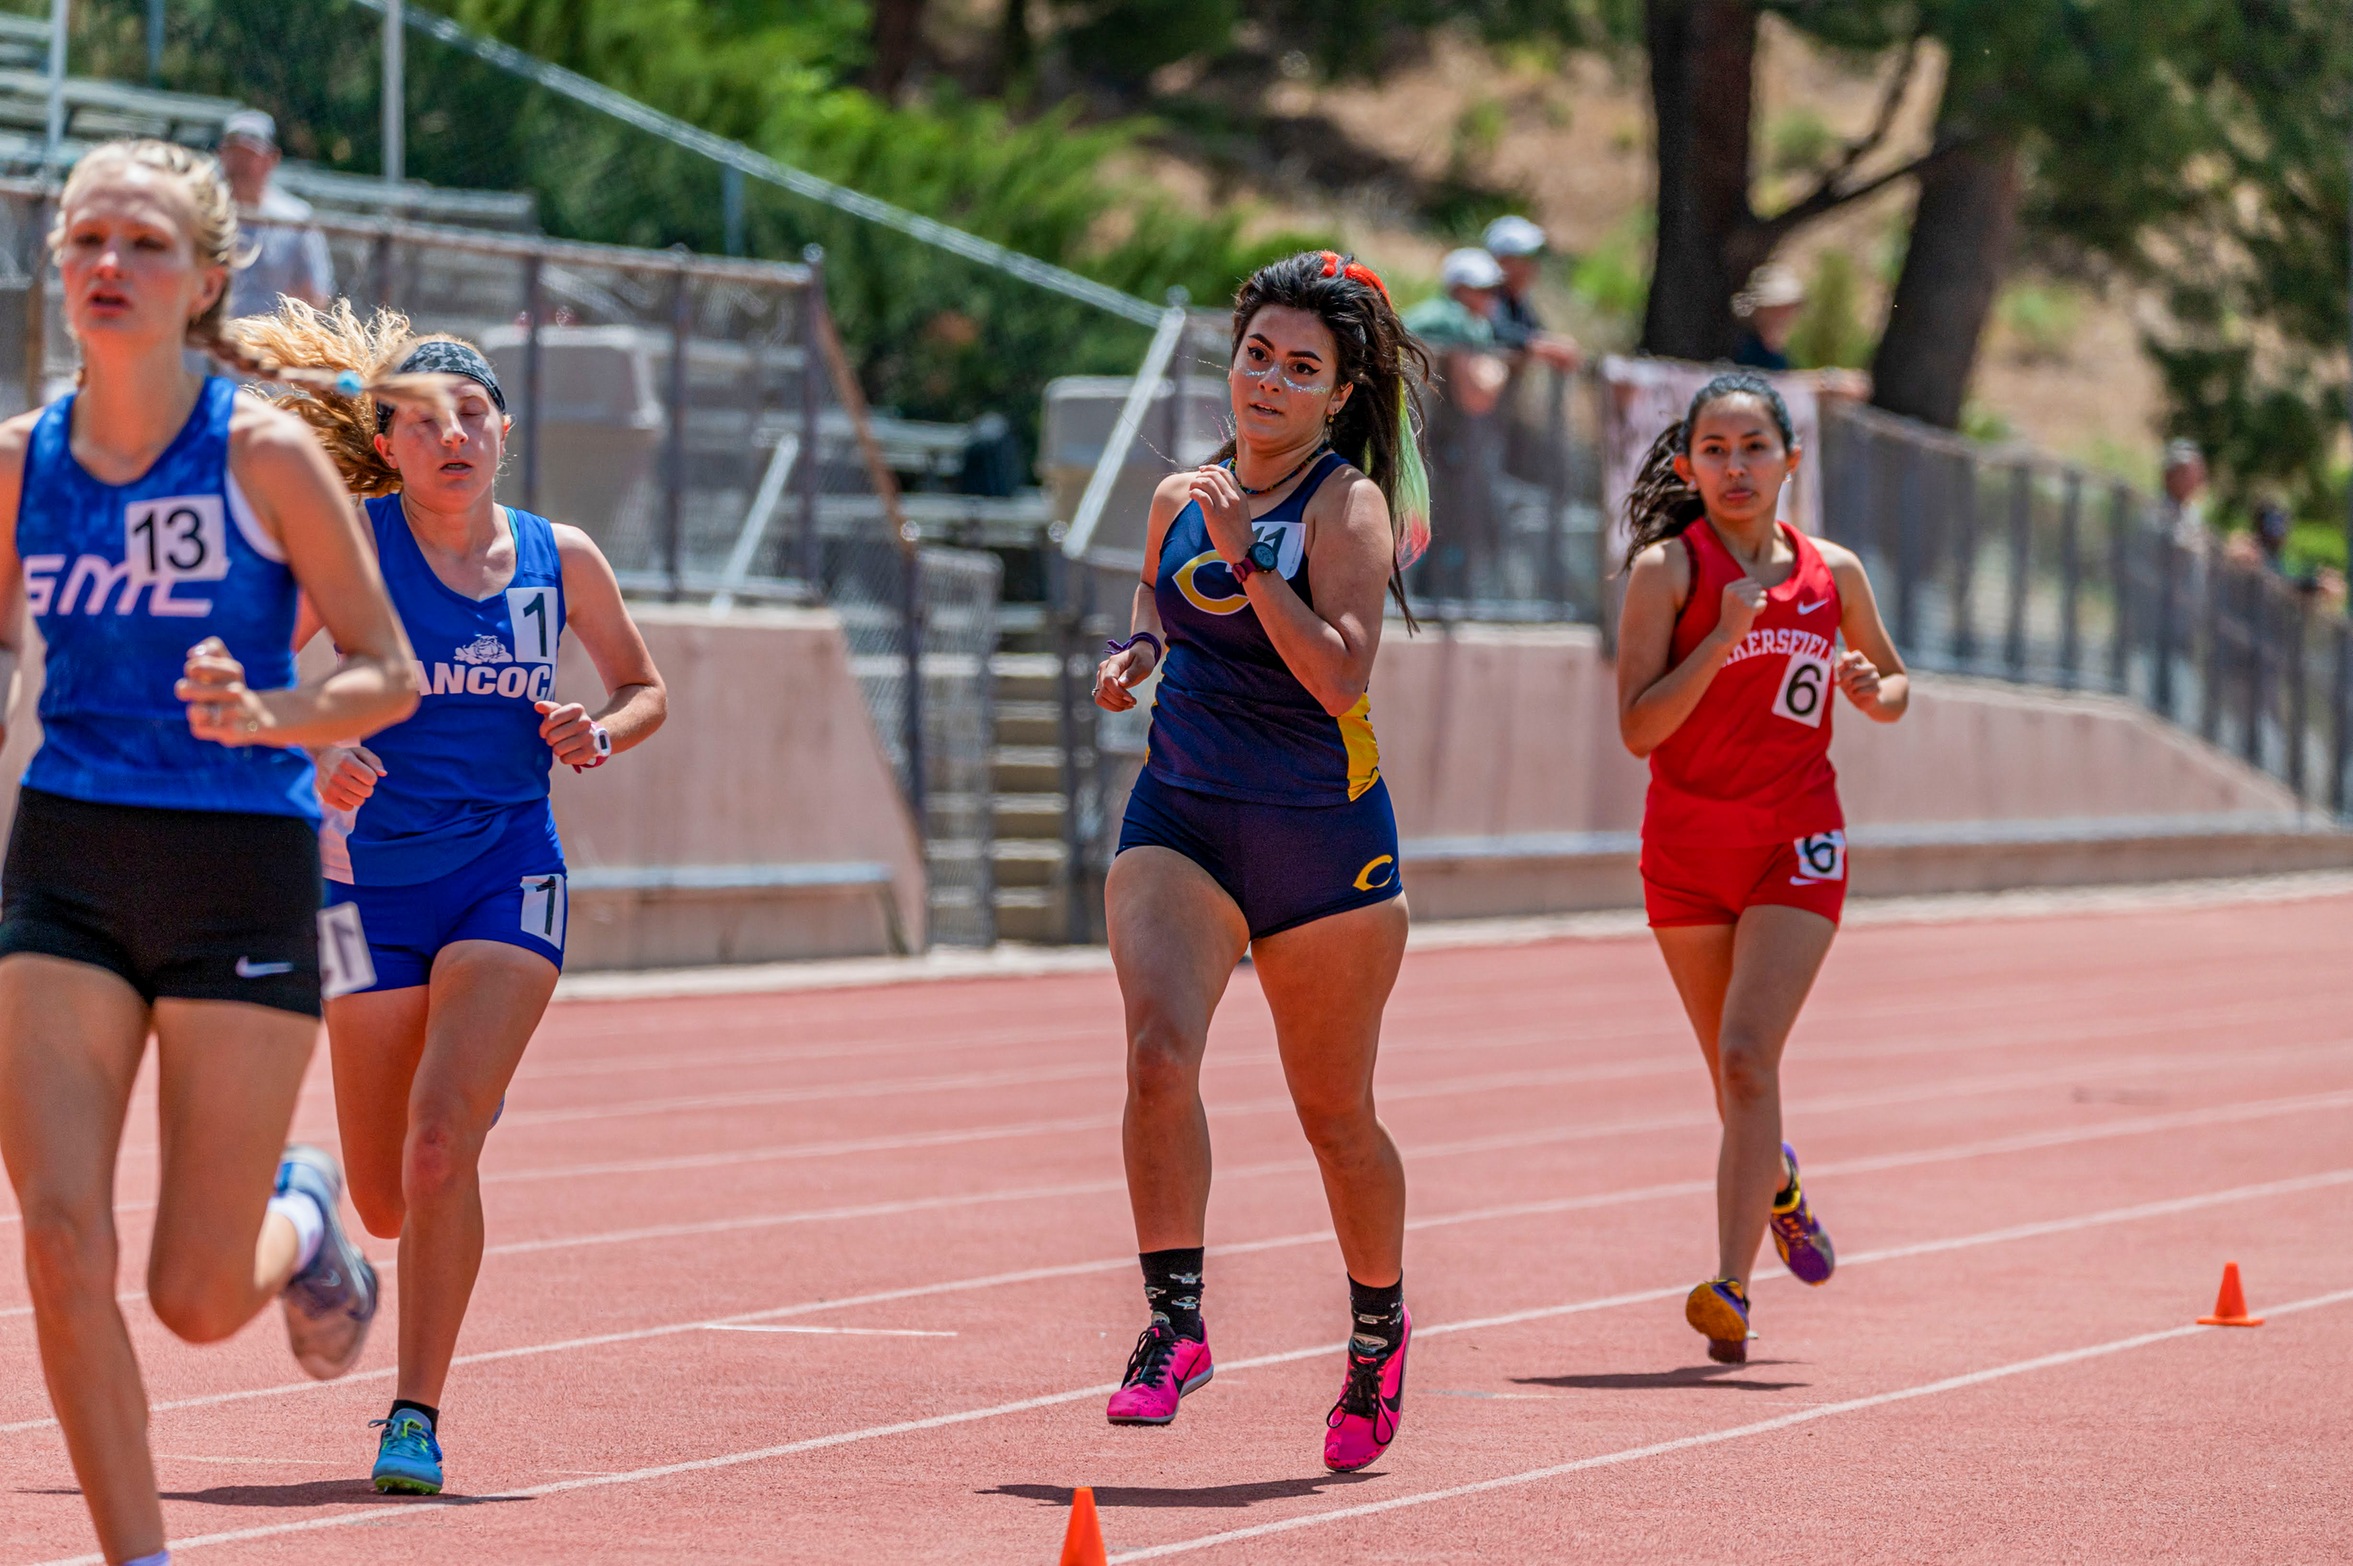 College of the Canyons track & field student-athlete Sarah Zamudio.